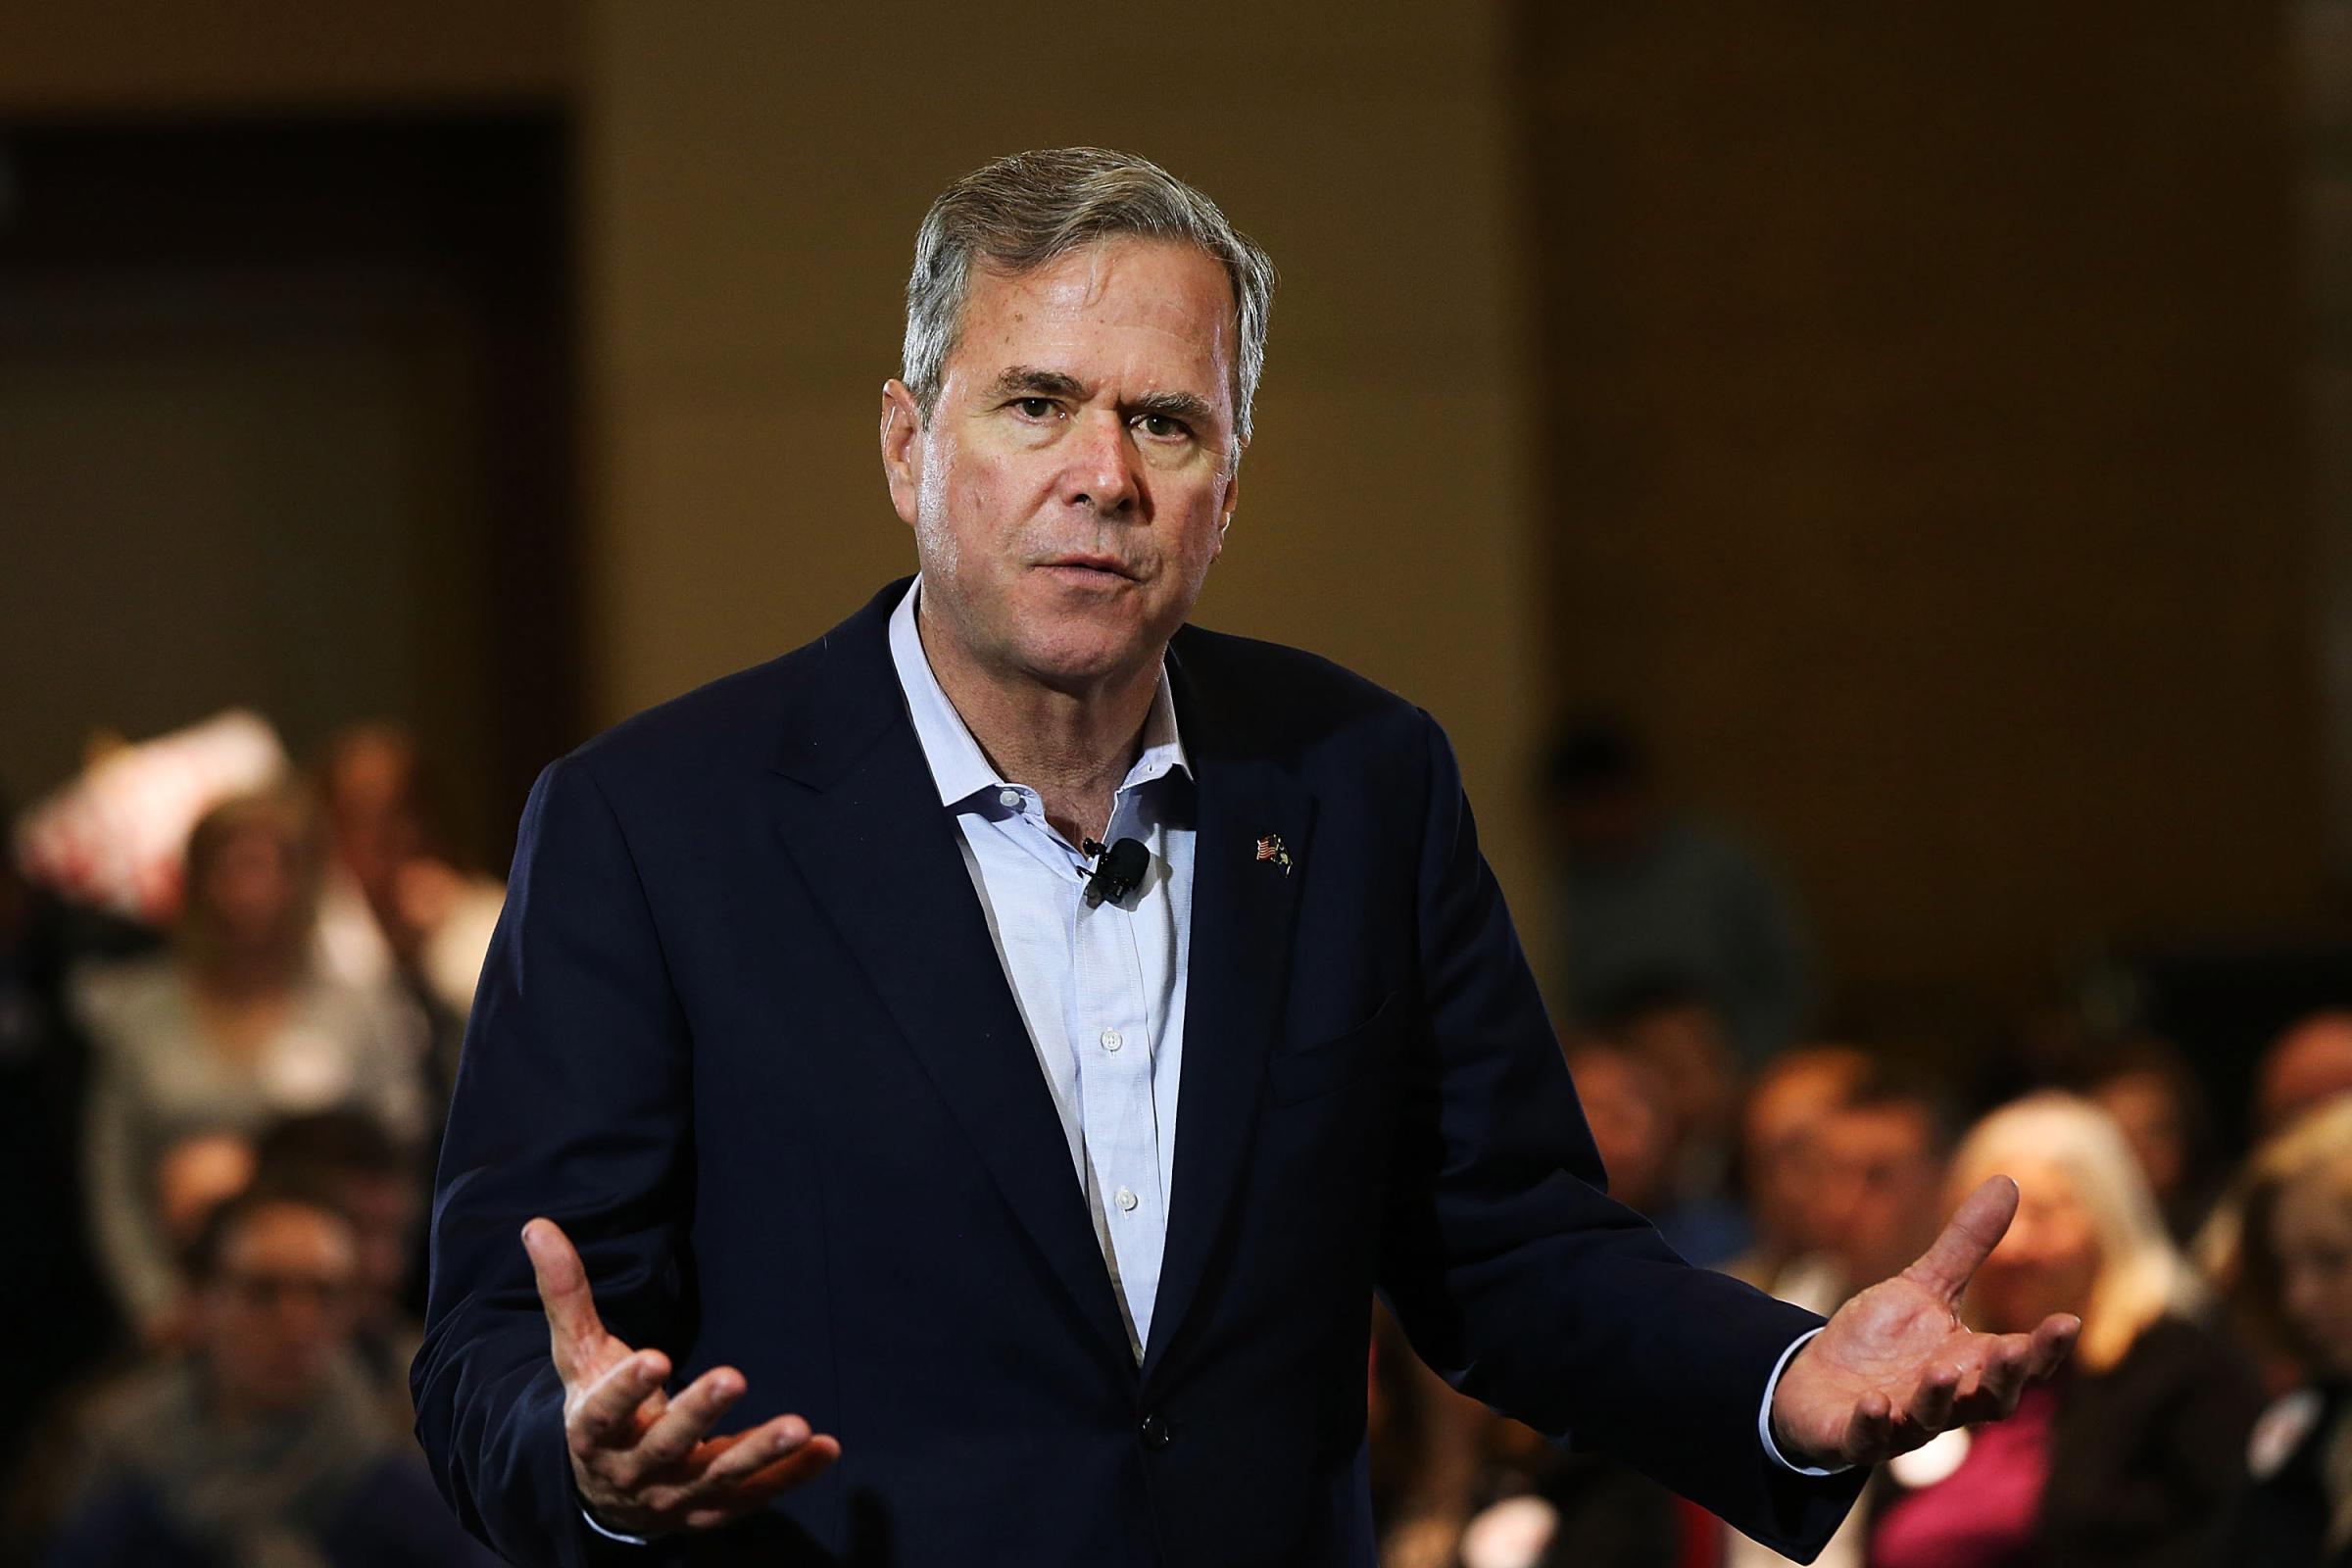 Republican presidential candidate Jeb Bush speaks to an audience of voters on February 18, 2016 in Columbia, South Carolina.